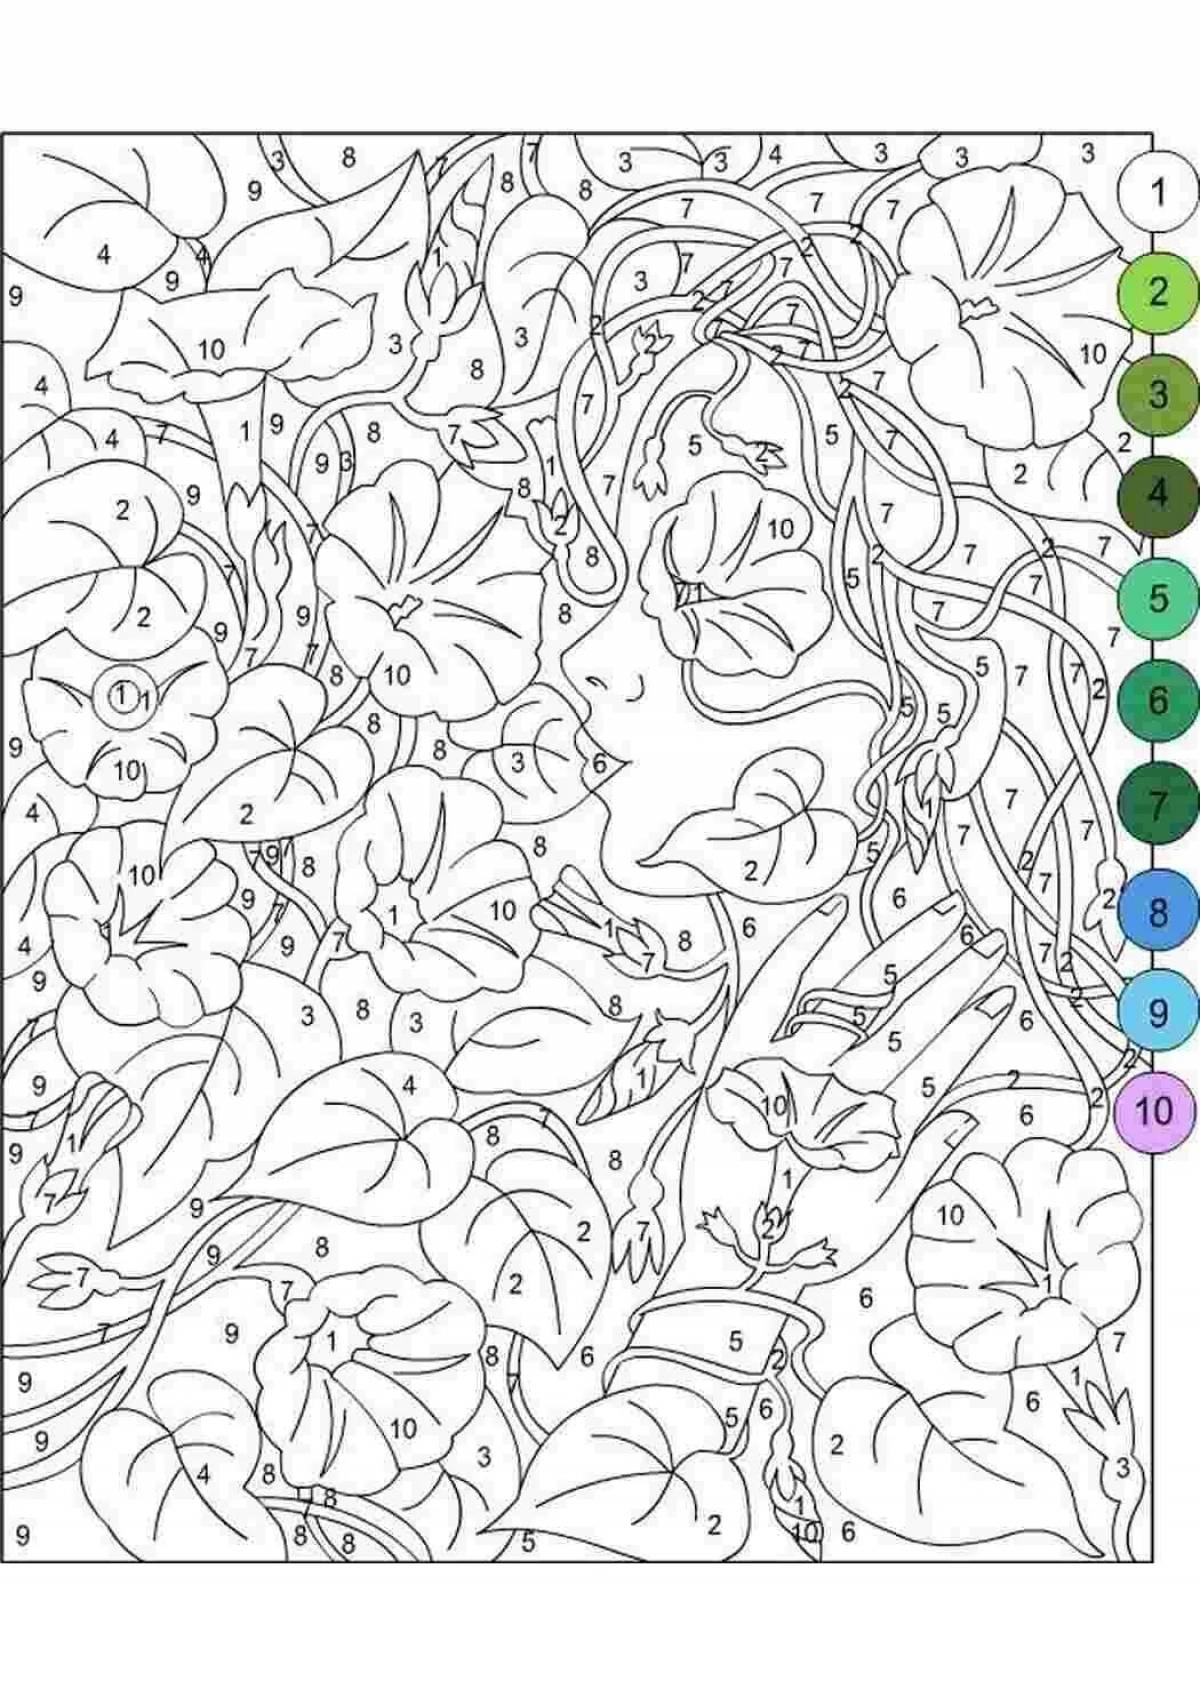 Delightful anti-stress wildberry coloring book